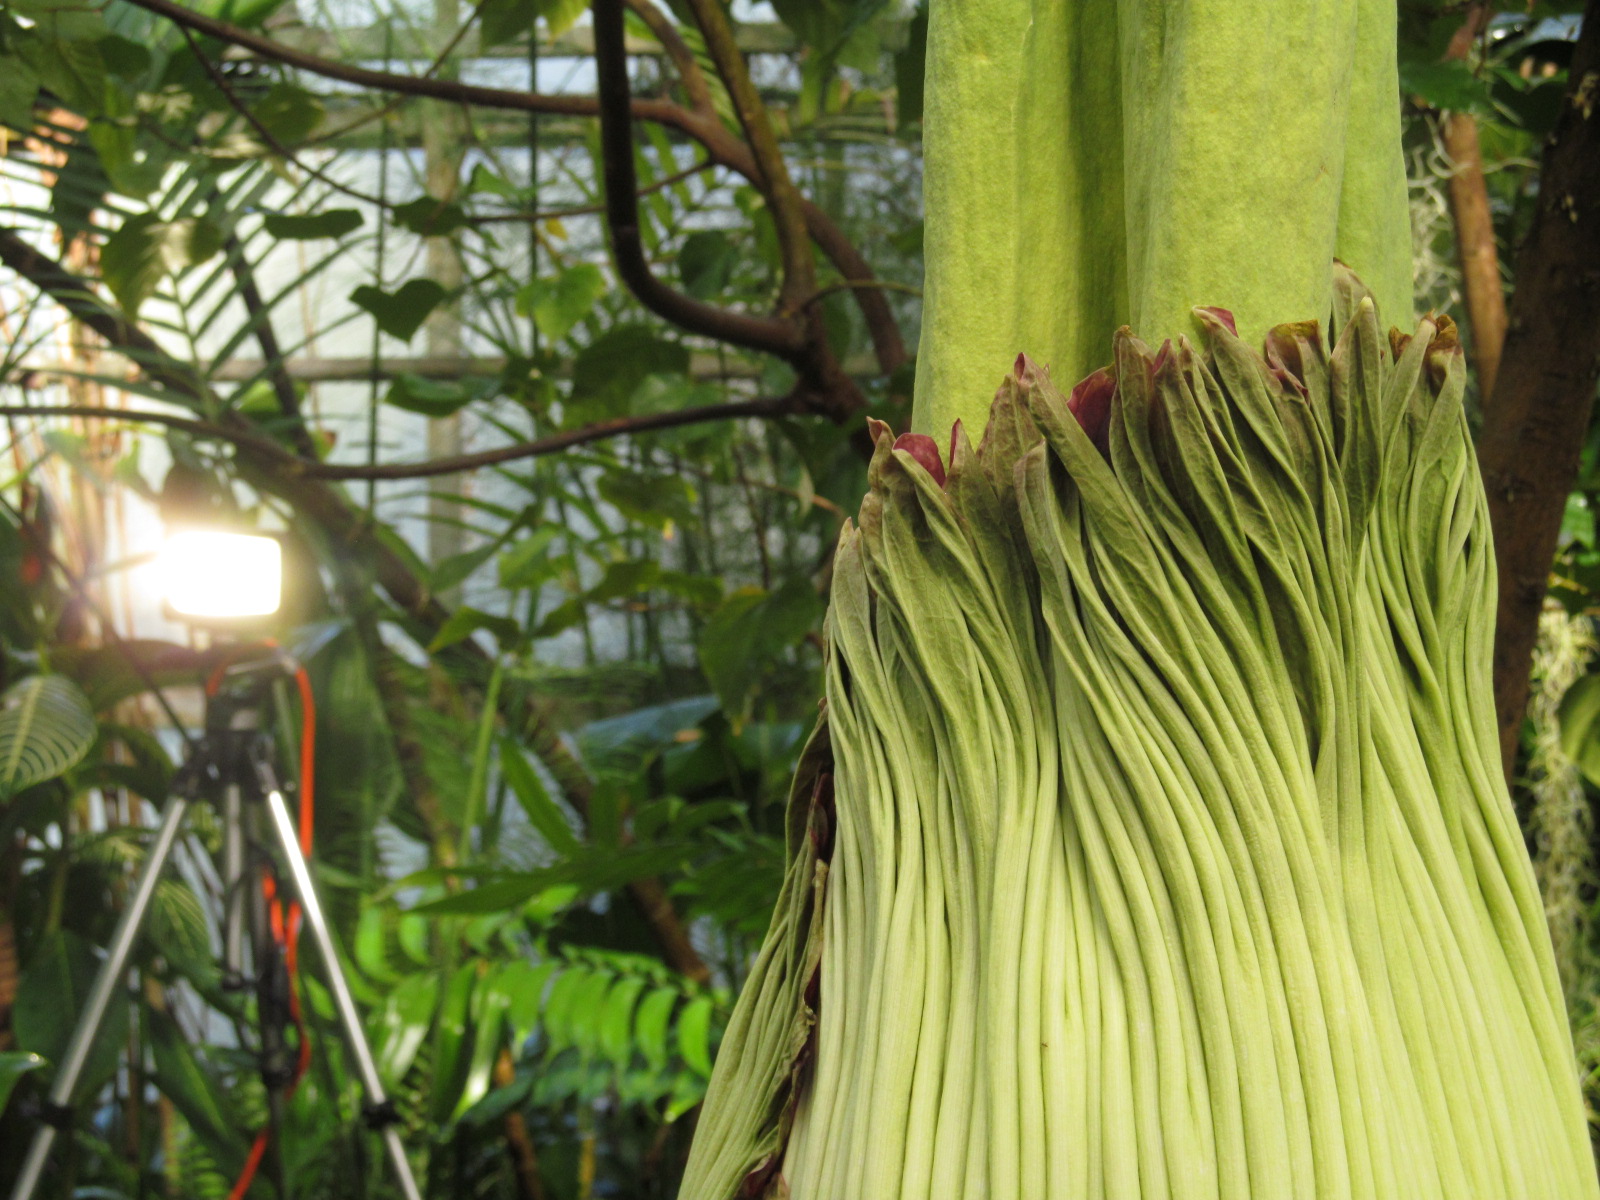 Trudy the corpse flower is showing signs that a bloom (and its distinctive odor of rotten flesh) is imminent. The botanical garden is collaborating with private photographers to capture time-lapse images of the event.